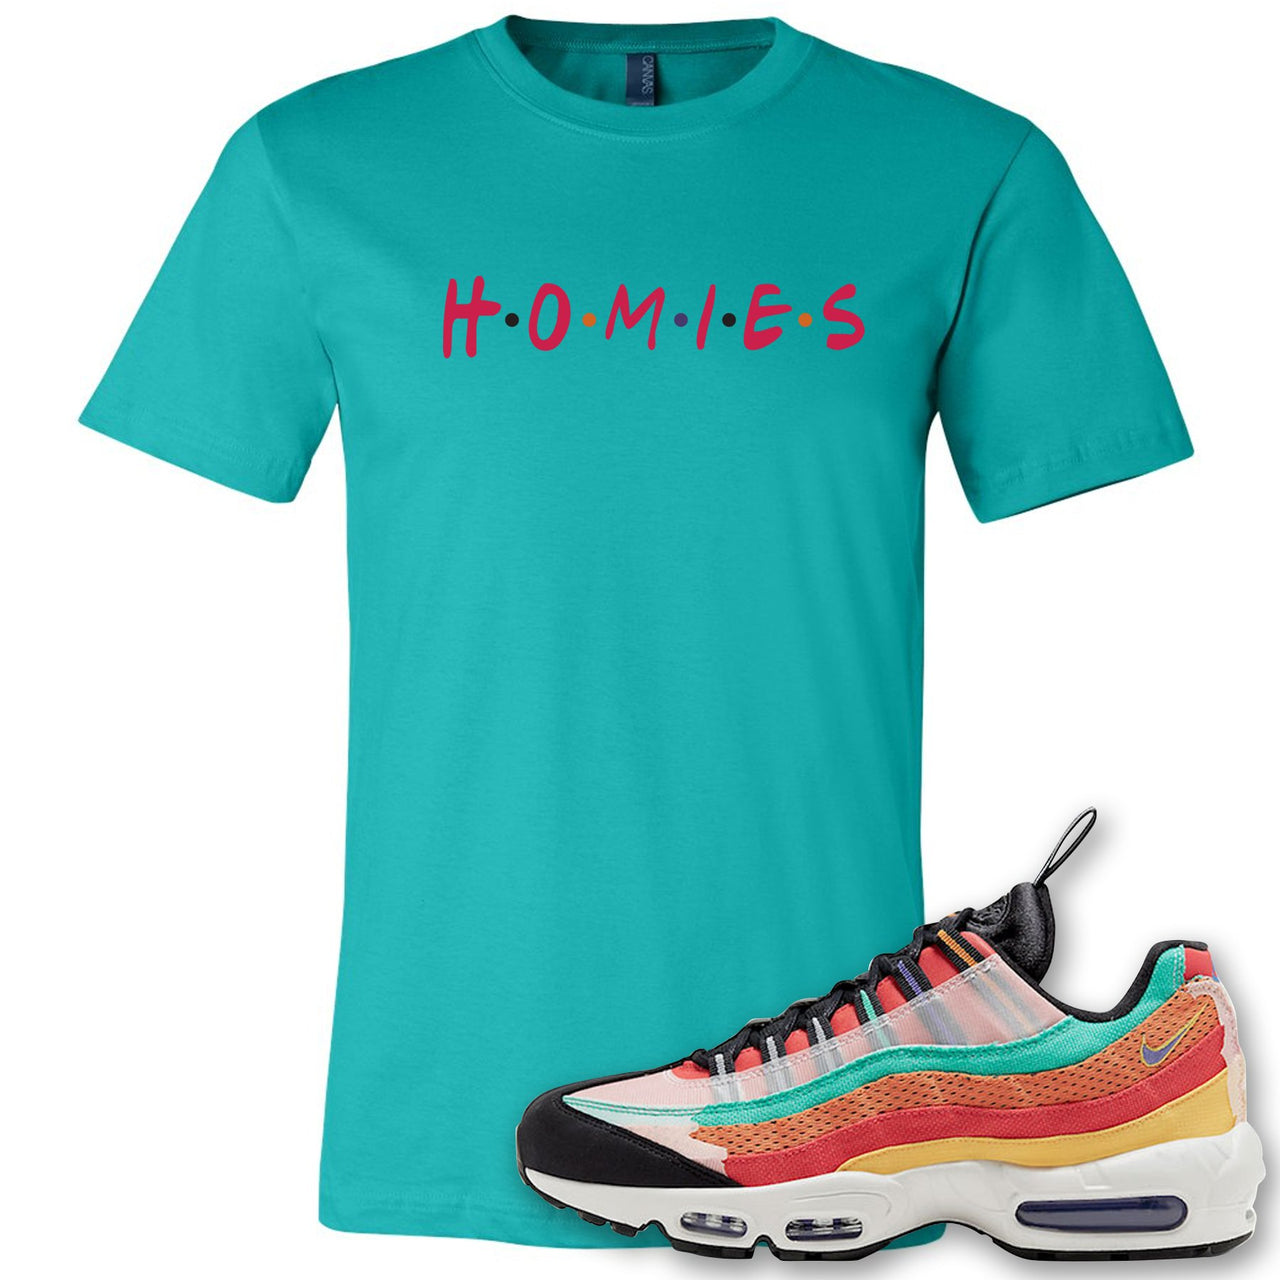 Air Max 95 Black History Month Sneaker Antique Jade Dome T Shirt | Tees to match Nike Air Max 95 Black History Month Shoes | Homies